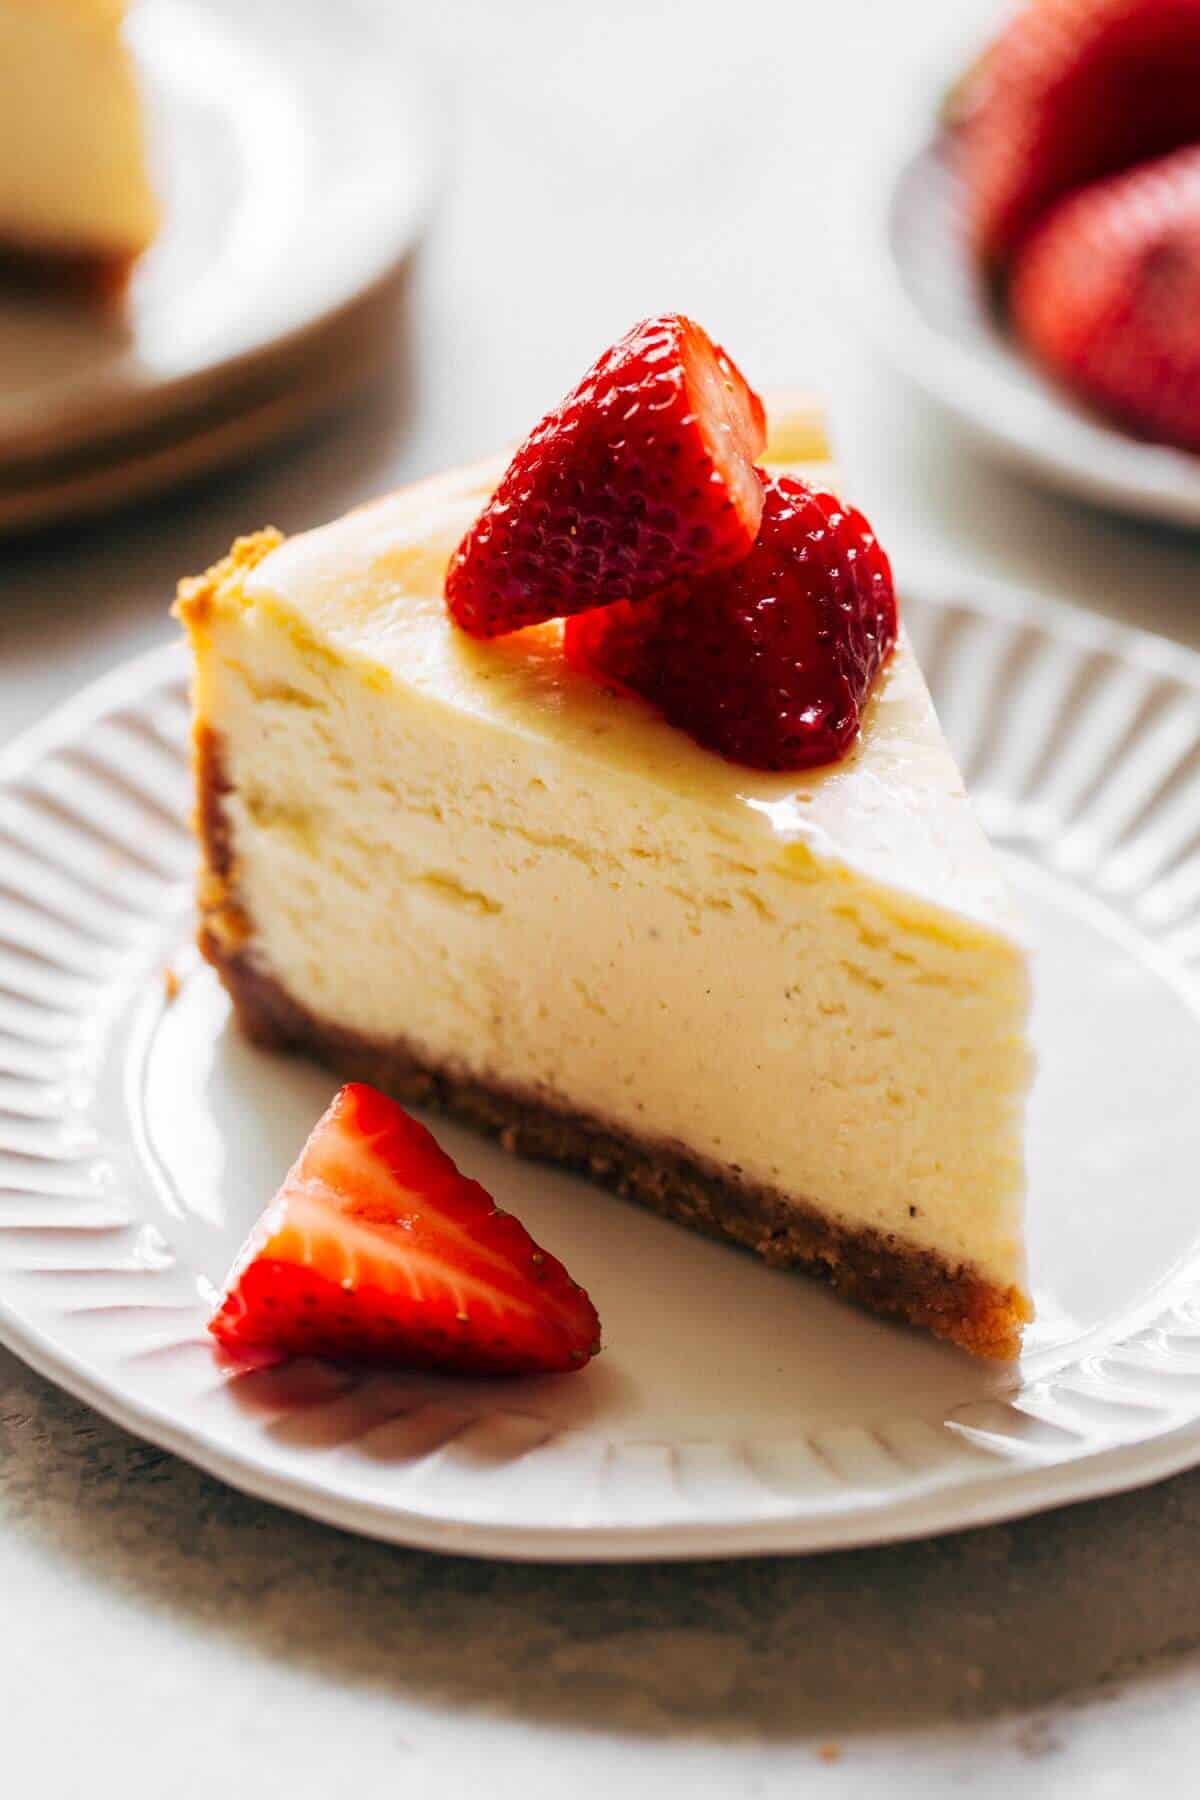 Best Classic Cheesecake Recipe (Step By Step Photos)